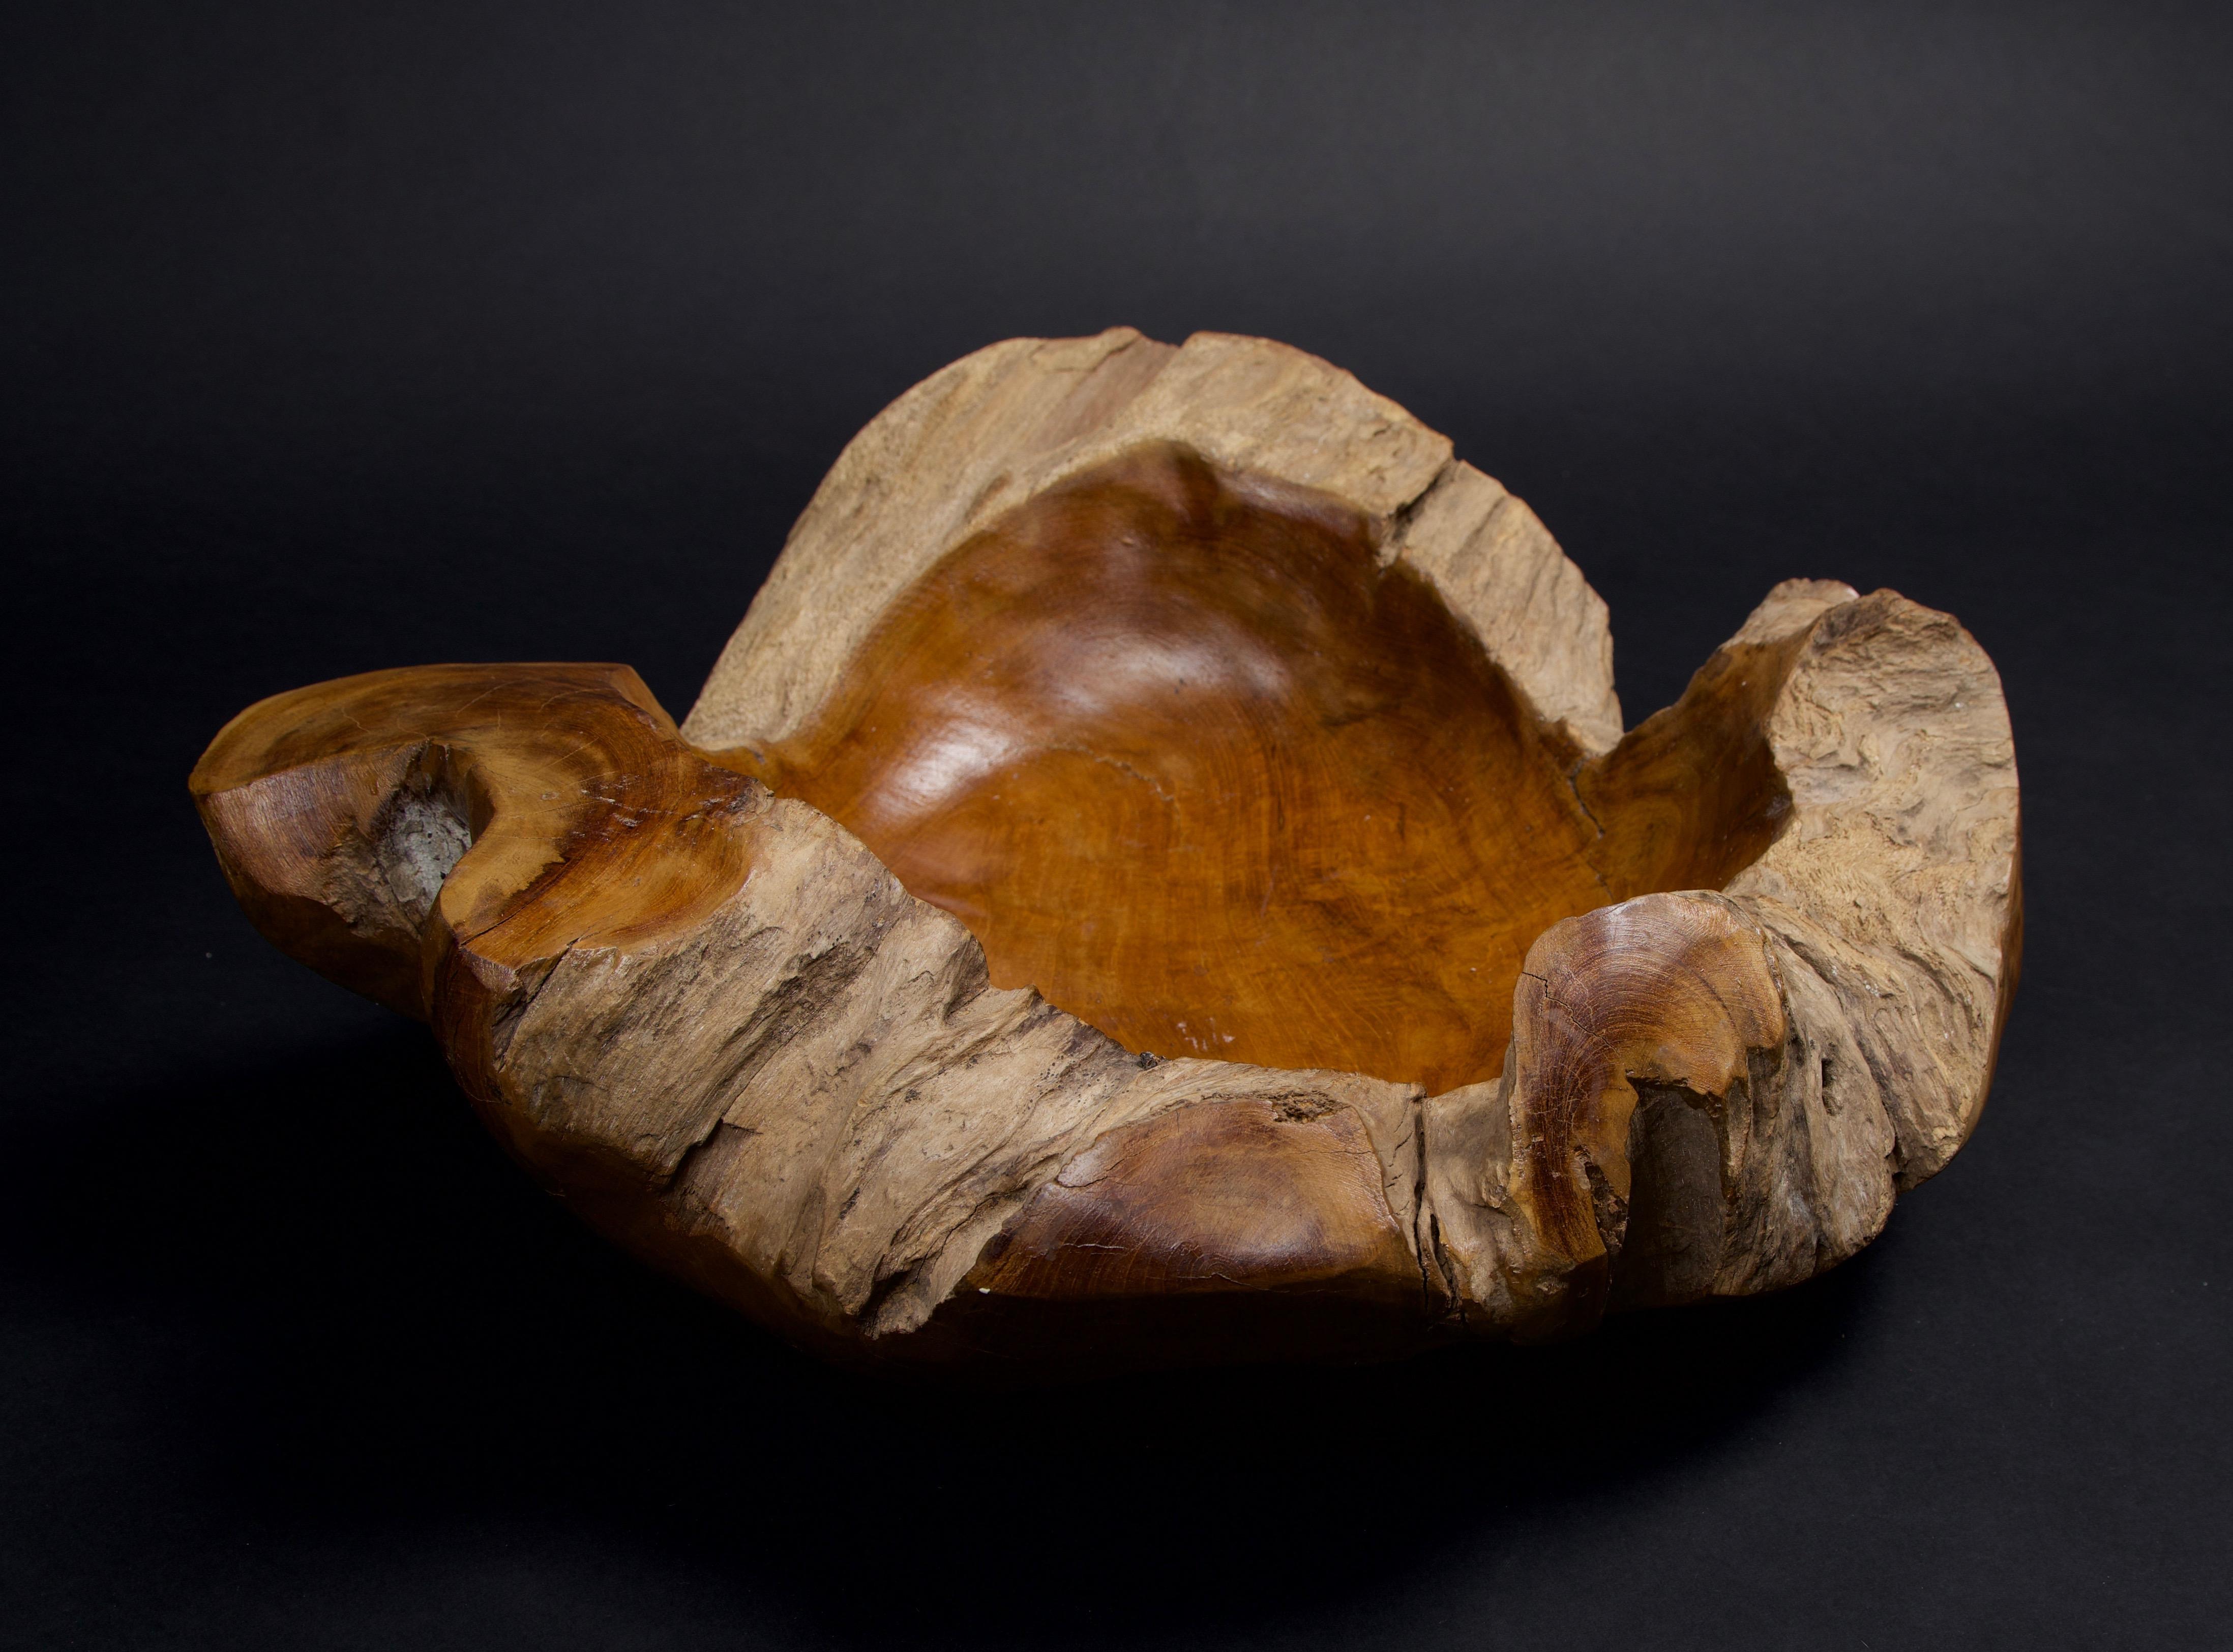 This bowl is hand carved from a teak root, leaving the live edge to give the bowl a unique organic shape. The inside and the outside of the bowl is waxed to give a smooth finish while the rim of the bowl is left untouched to preserve the natural